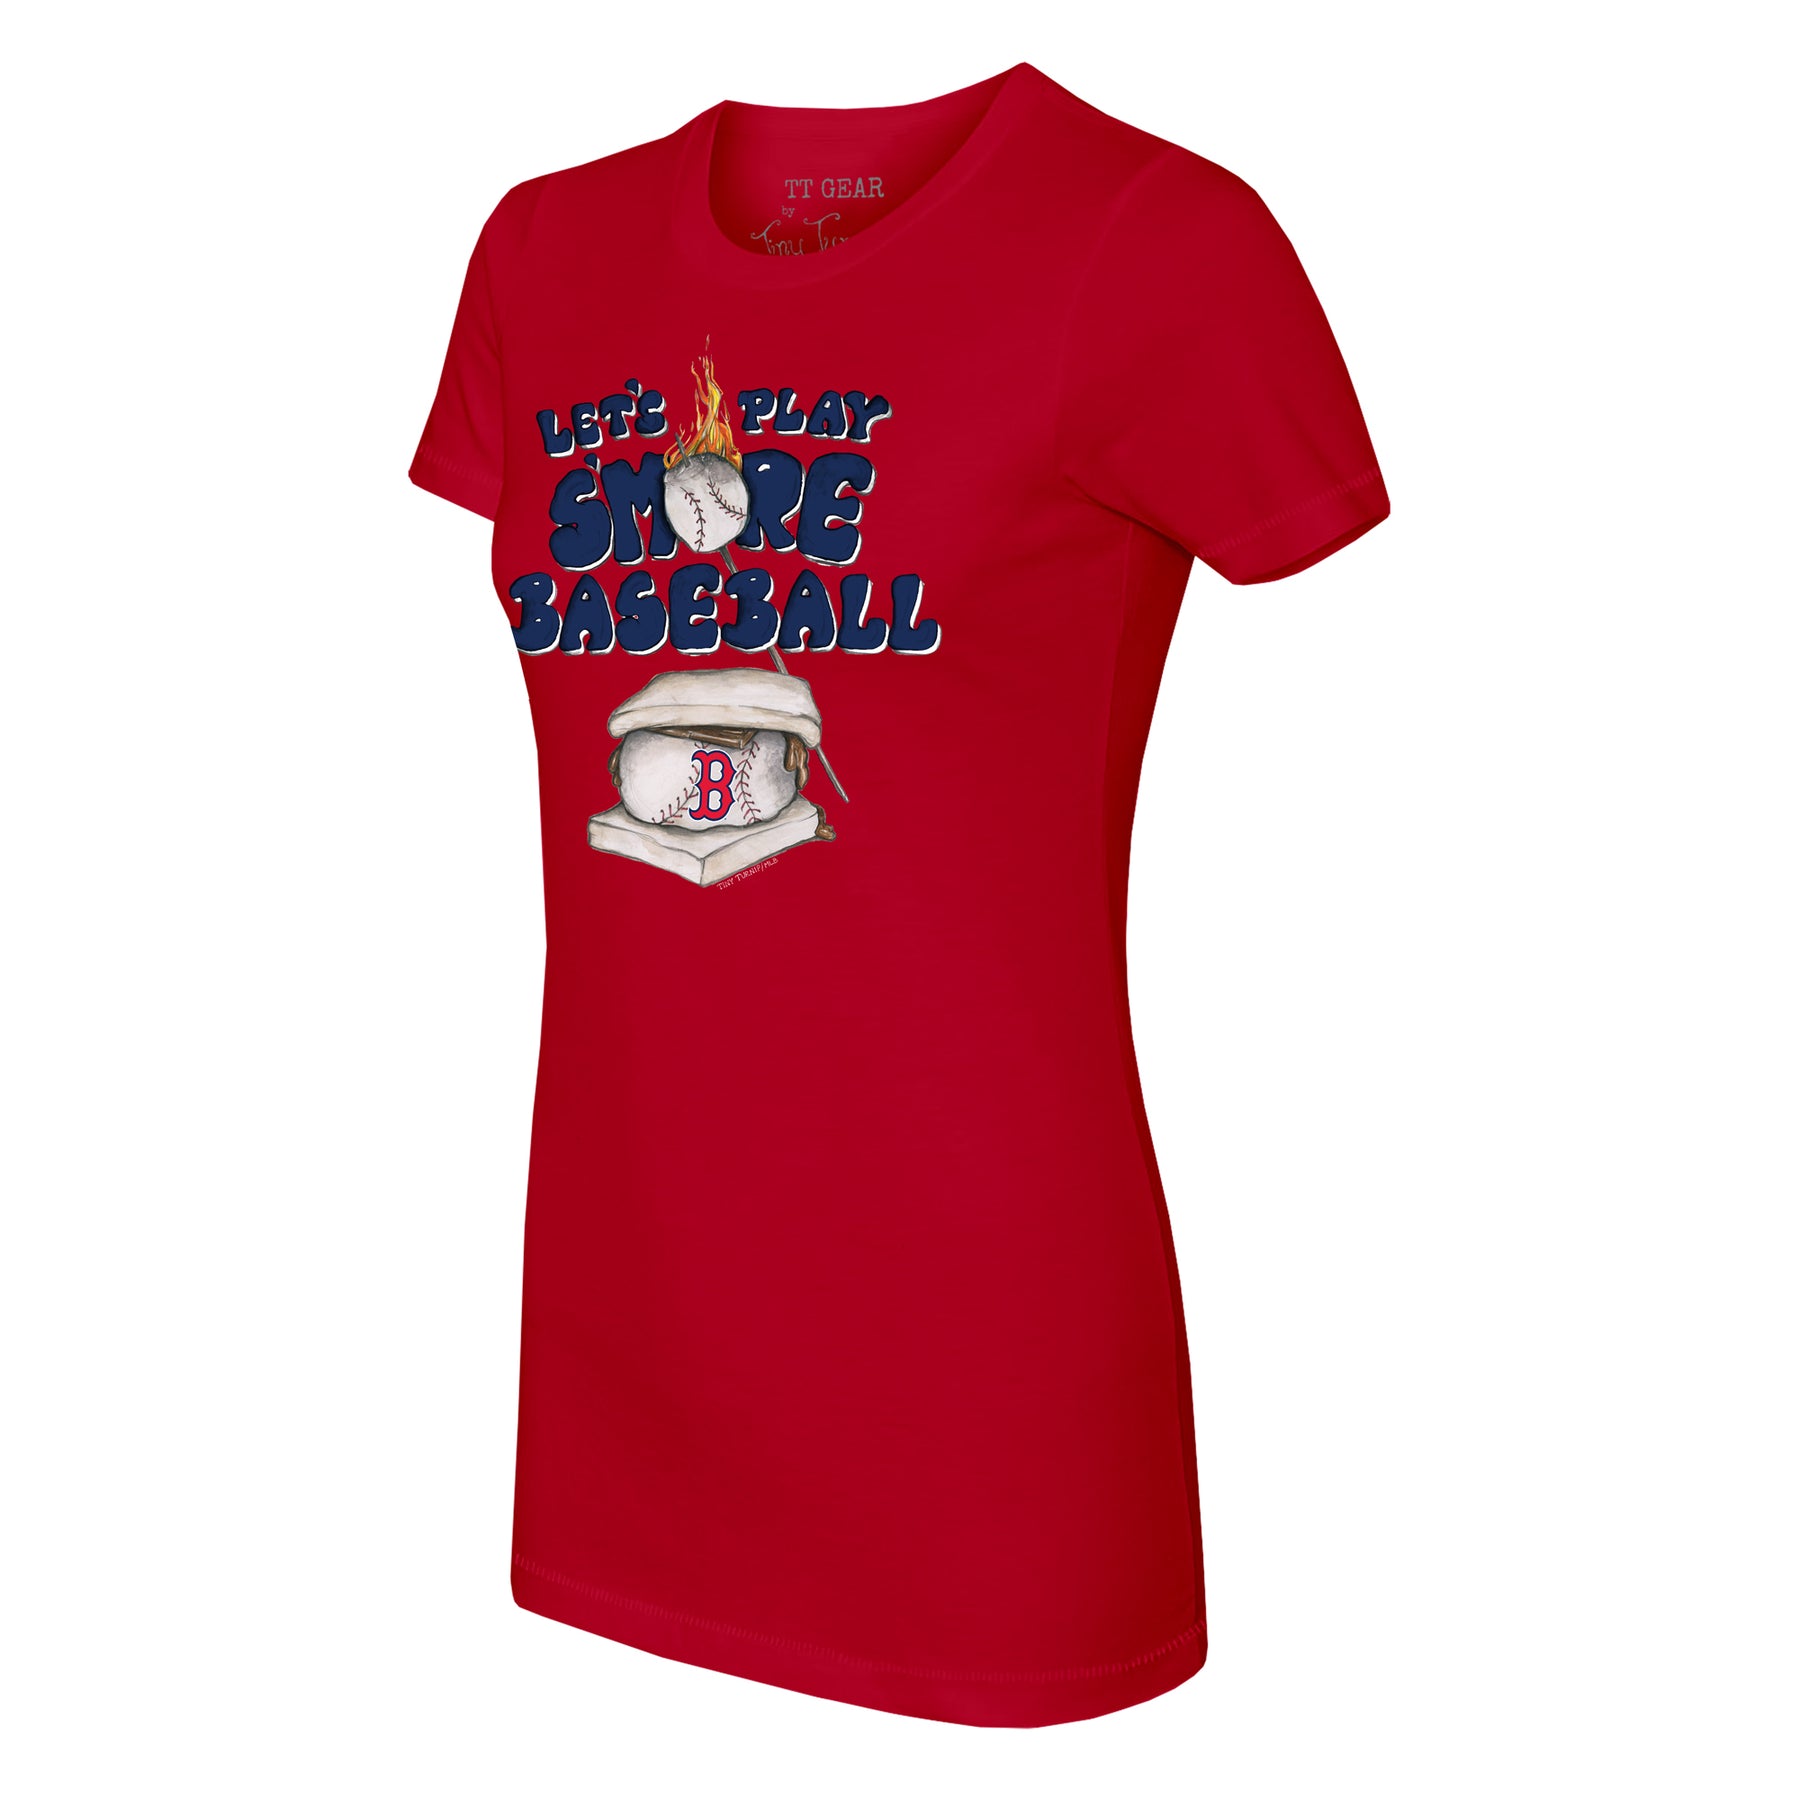 Boston Red Sox S'mores Tee Shirt